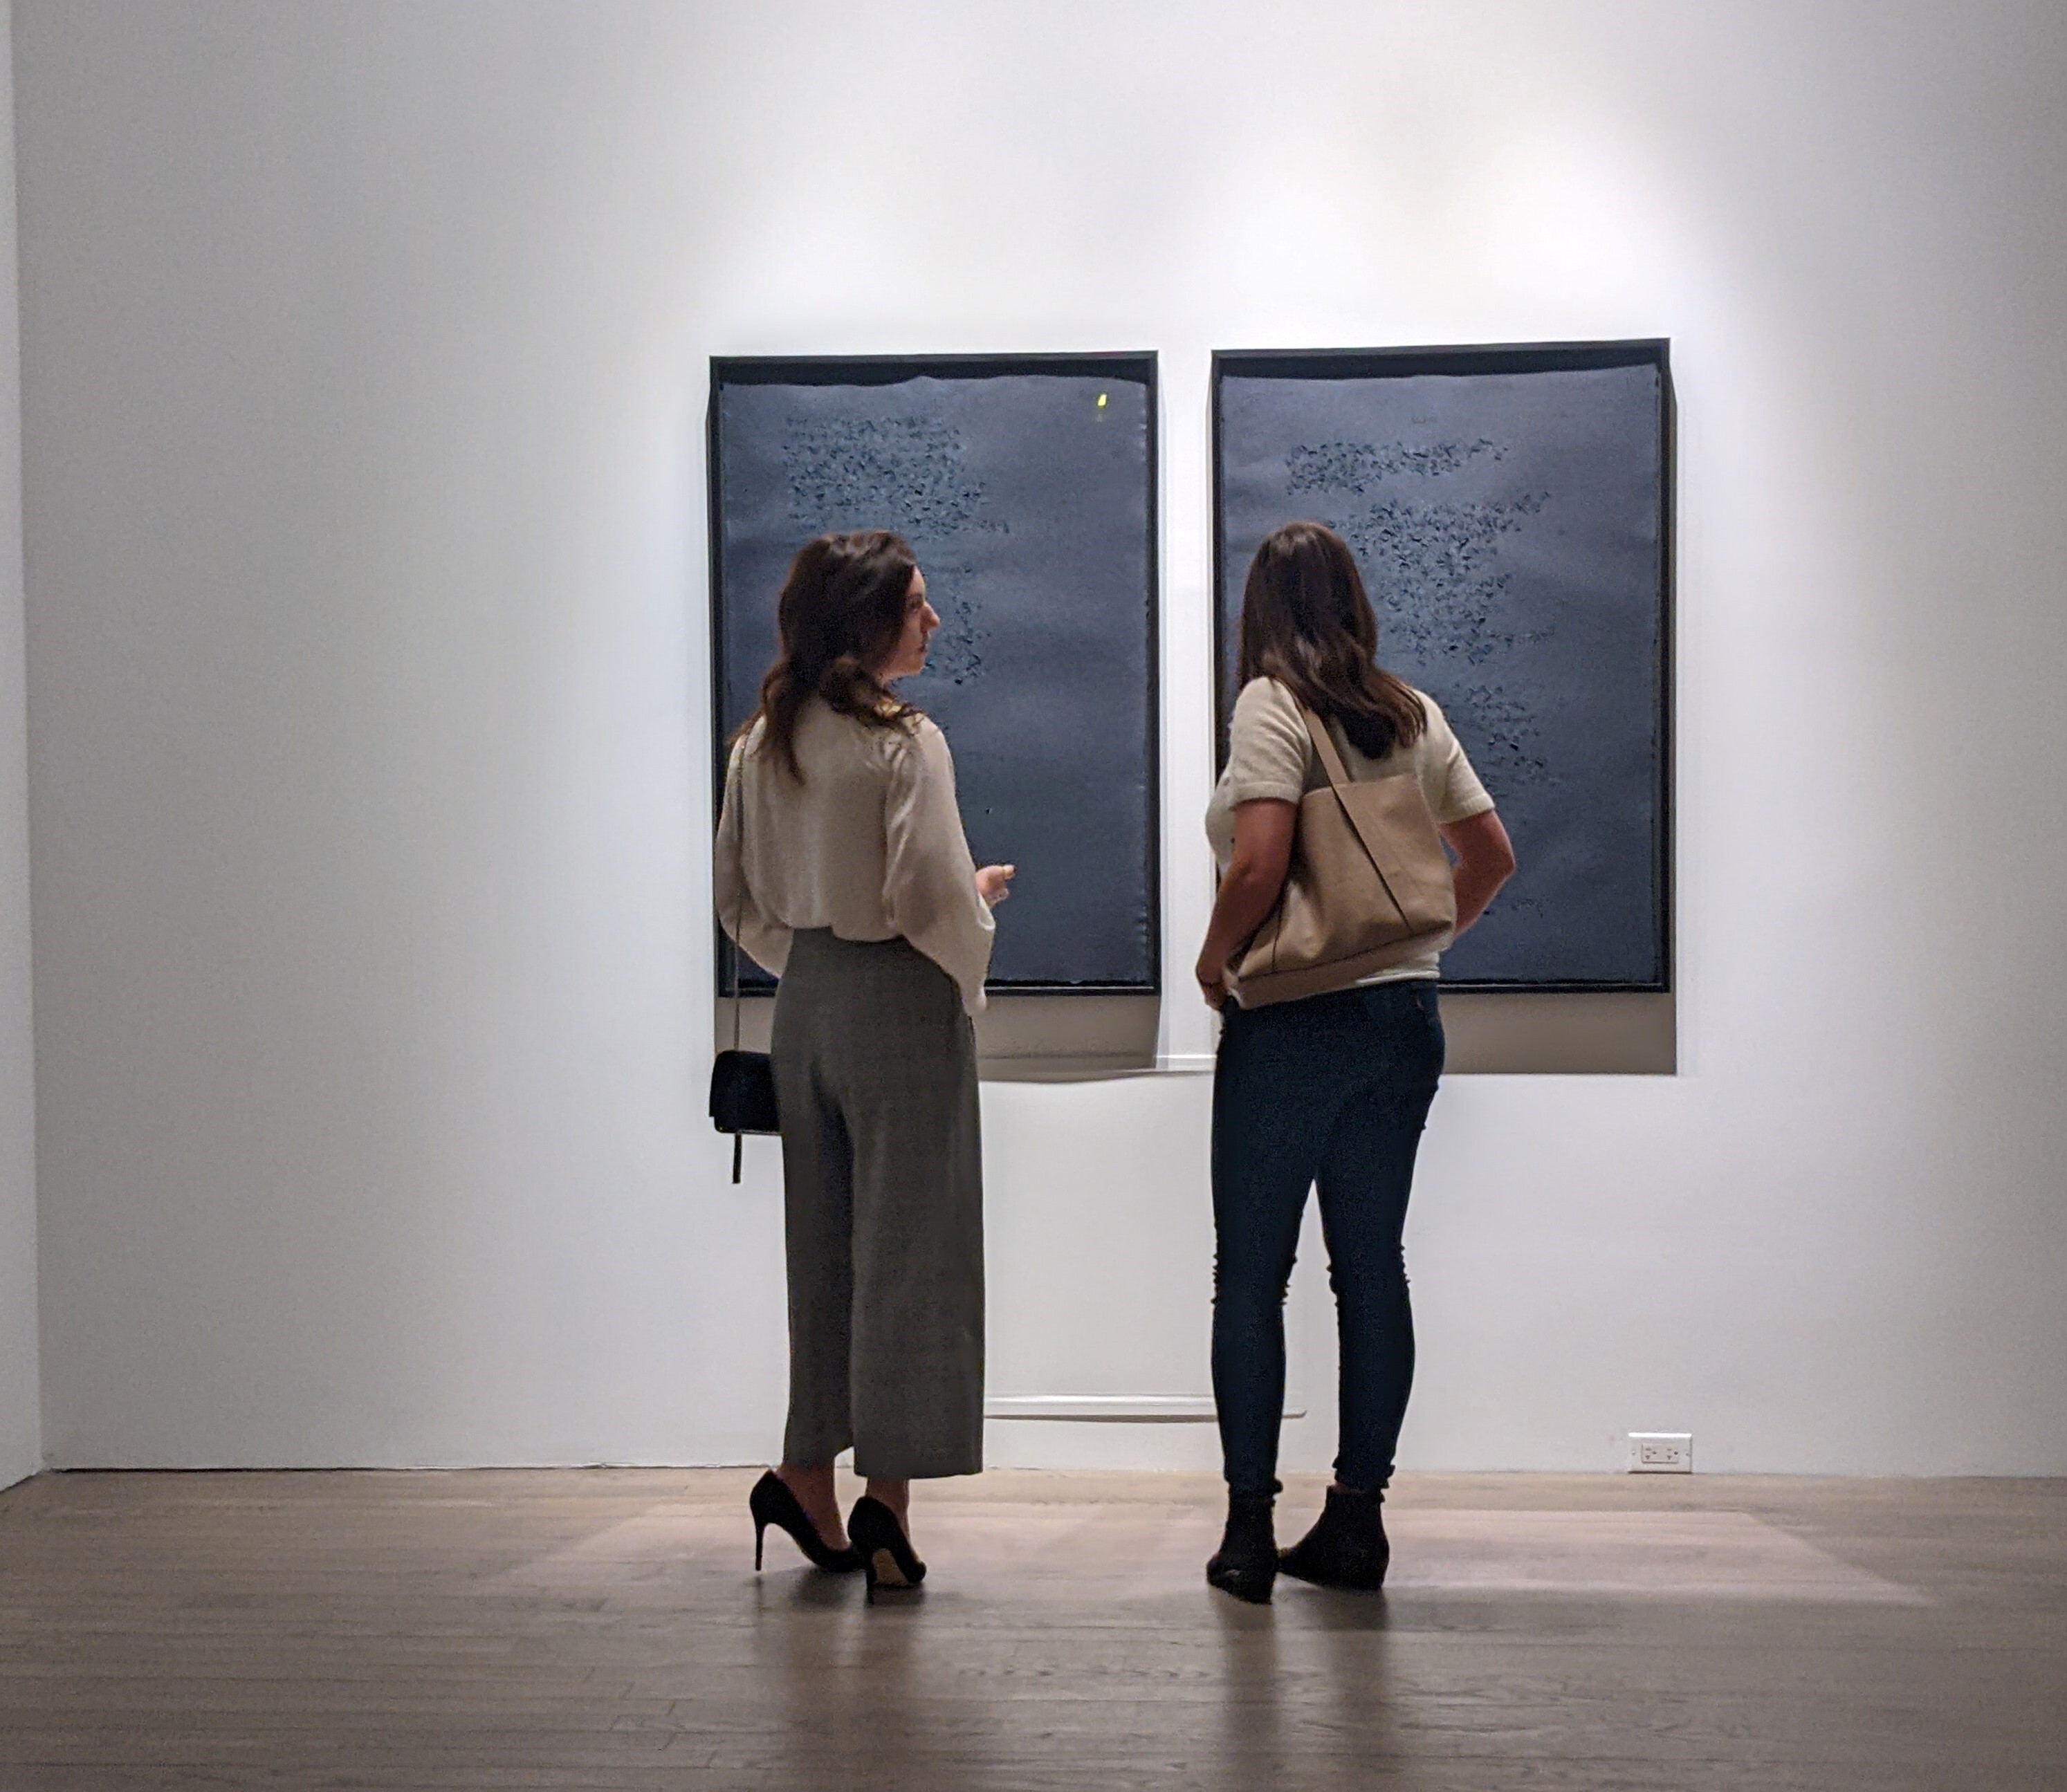 Two women view a diptych artwork on a white gallery wall.